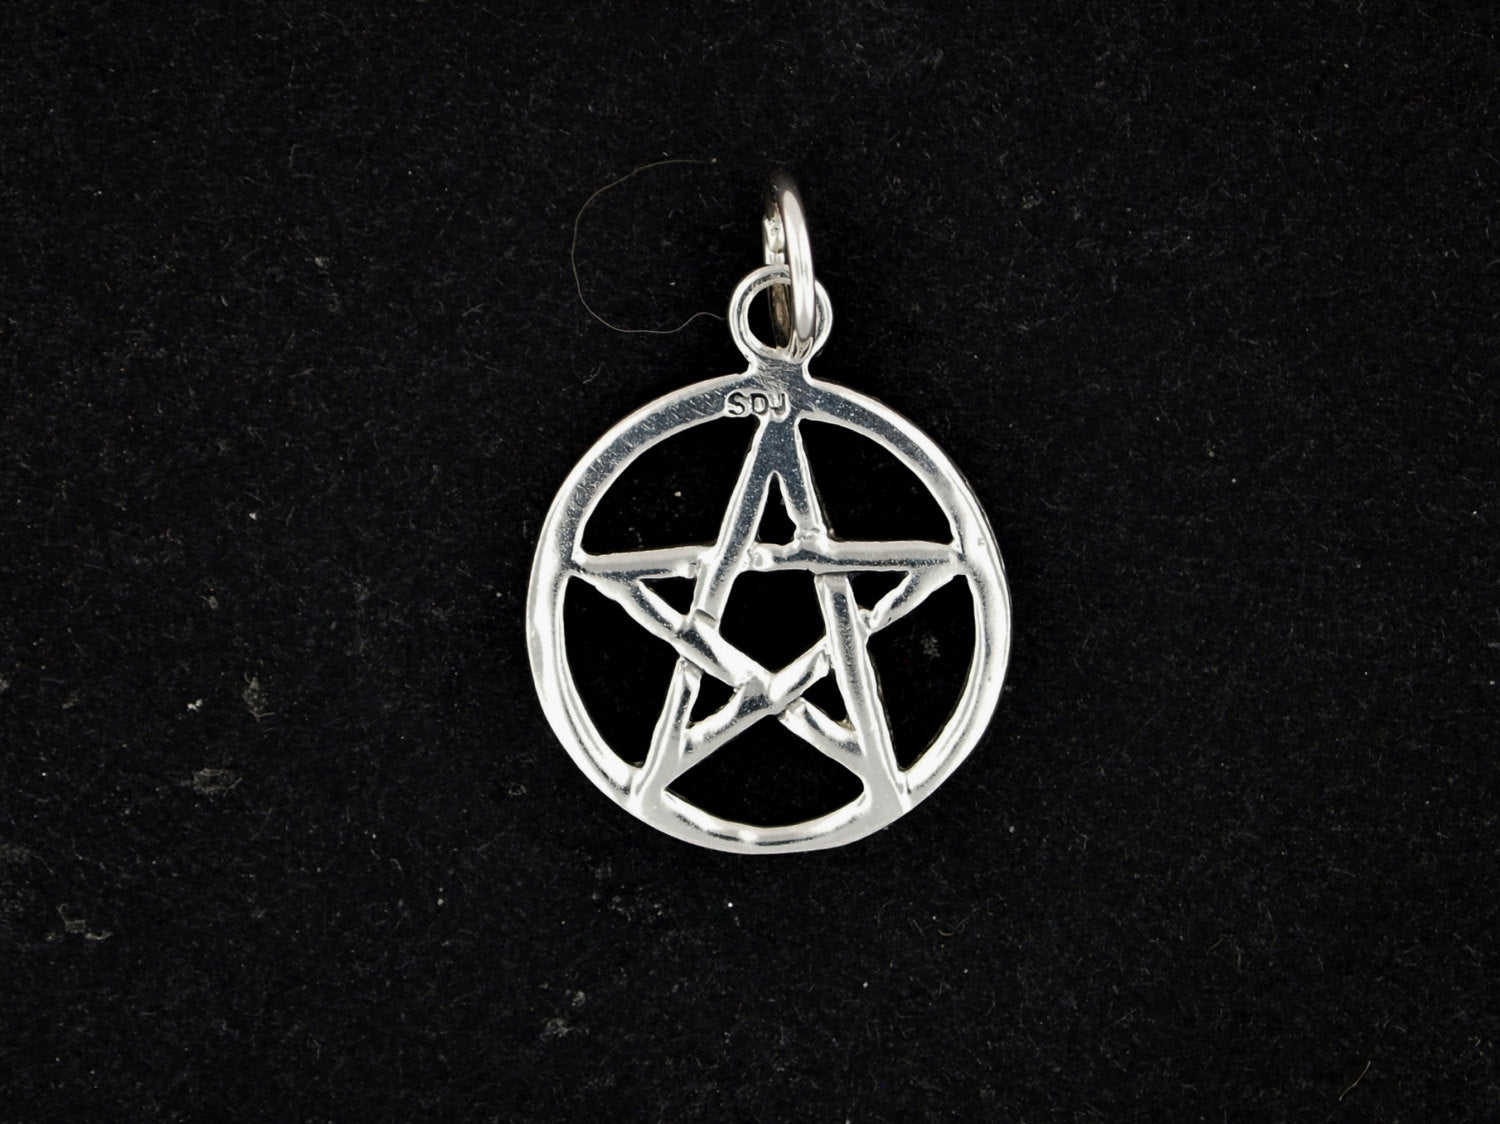 Small Two Sided Pentacle Pendant in 925 Silver or Bronze, Small Pentacle Charm Jewelry, Small Star Charm, Jewellery Gift for Wicca Pagan, Sterling Silver Pentacle Pendant, Pagan Pentacle Pendant, Small Pentacle Pendant, Sterling Silver Pagan Pendant